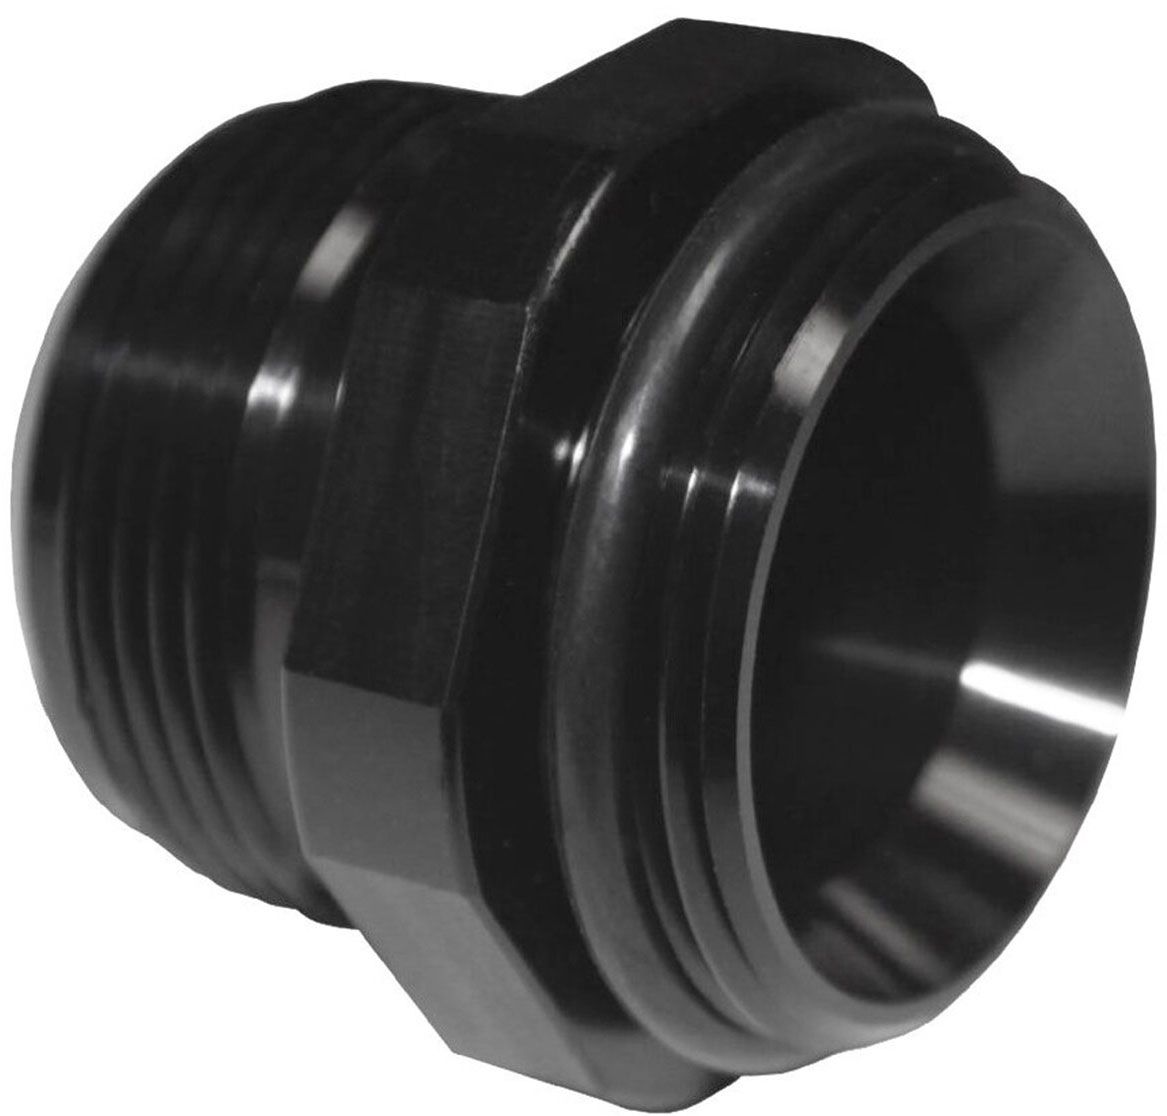 MZWN0041S - -20AN WATERNECK FITTING BLACK